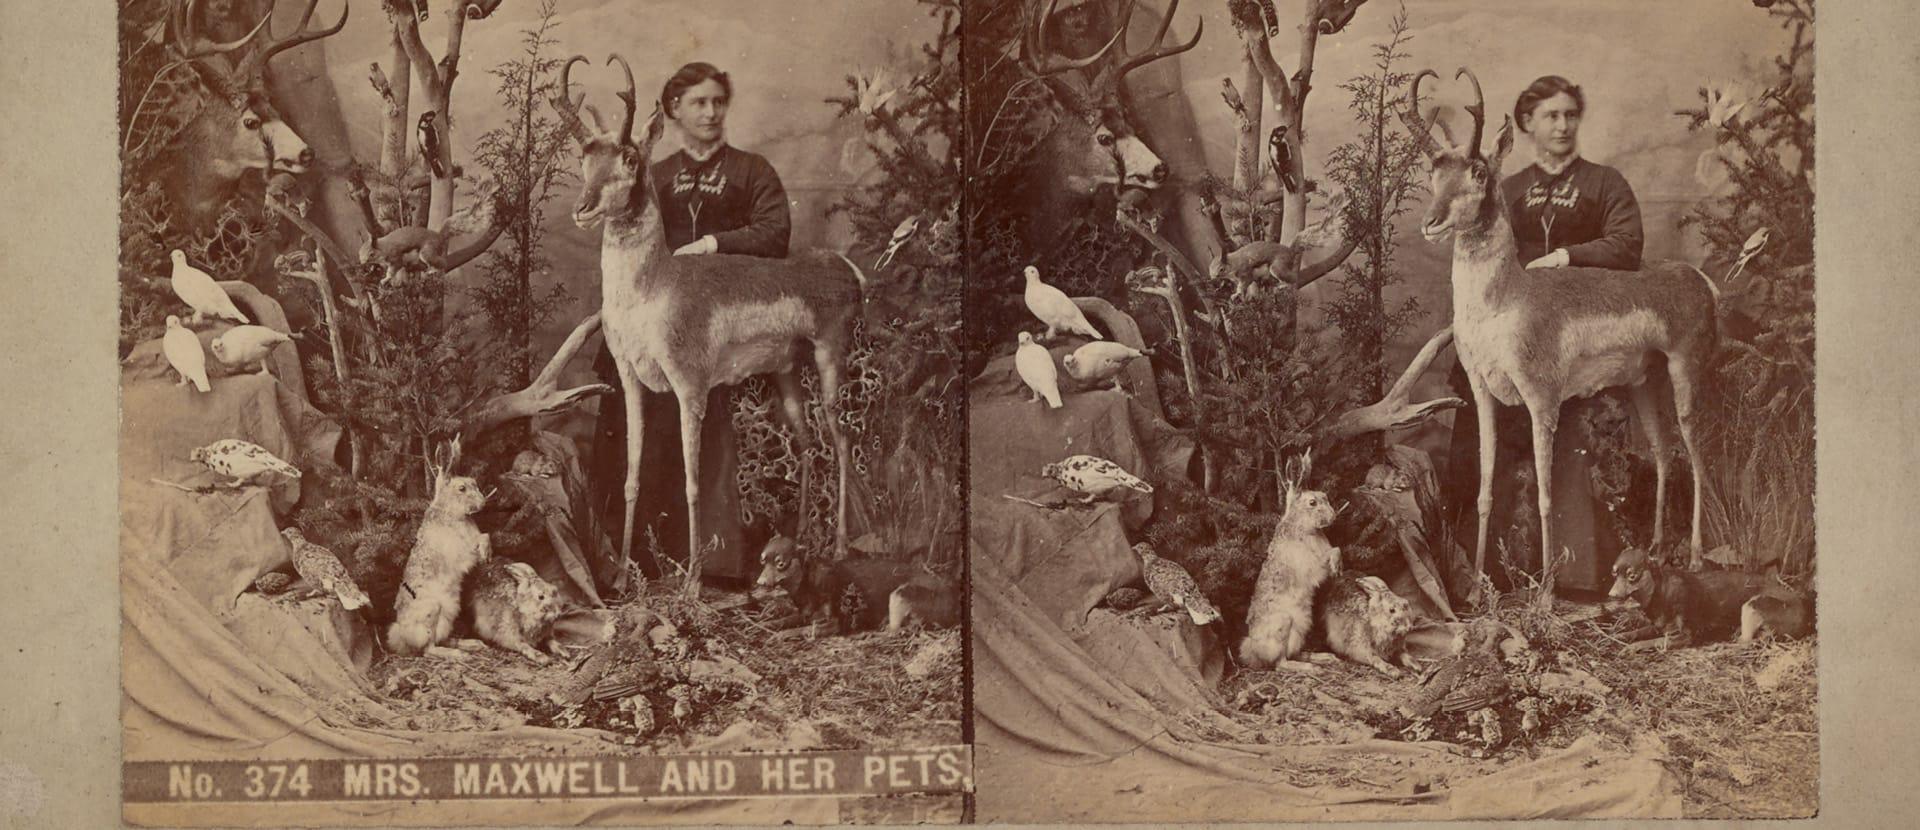 The naturalist Martha Maxwell, perhaps the first female naturalist to shoot and prepare her own specimens, shown in one of her signature lifelike tableaus around 1879